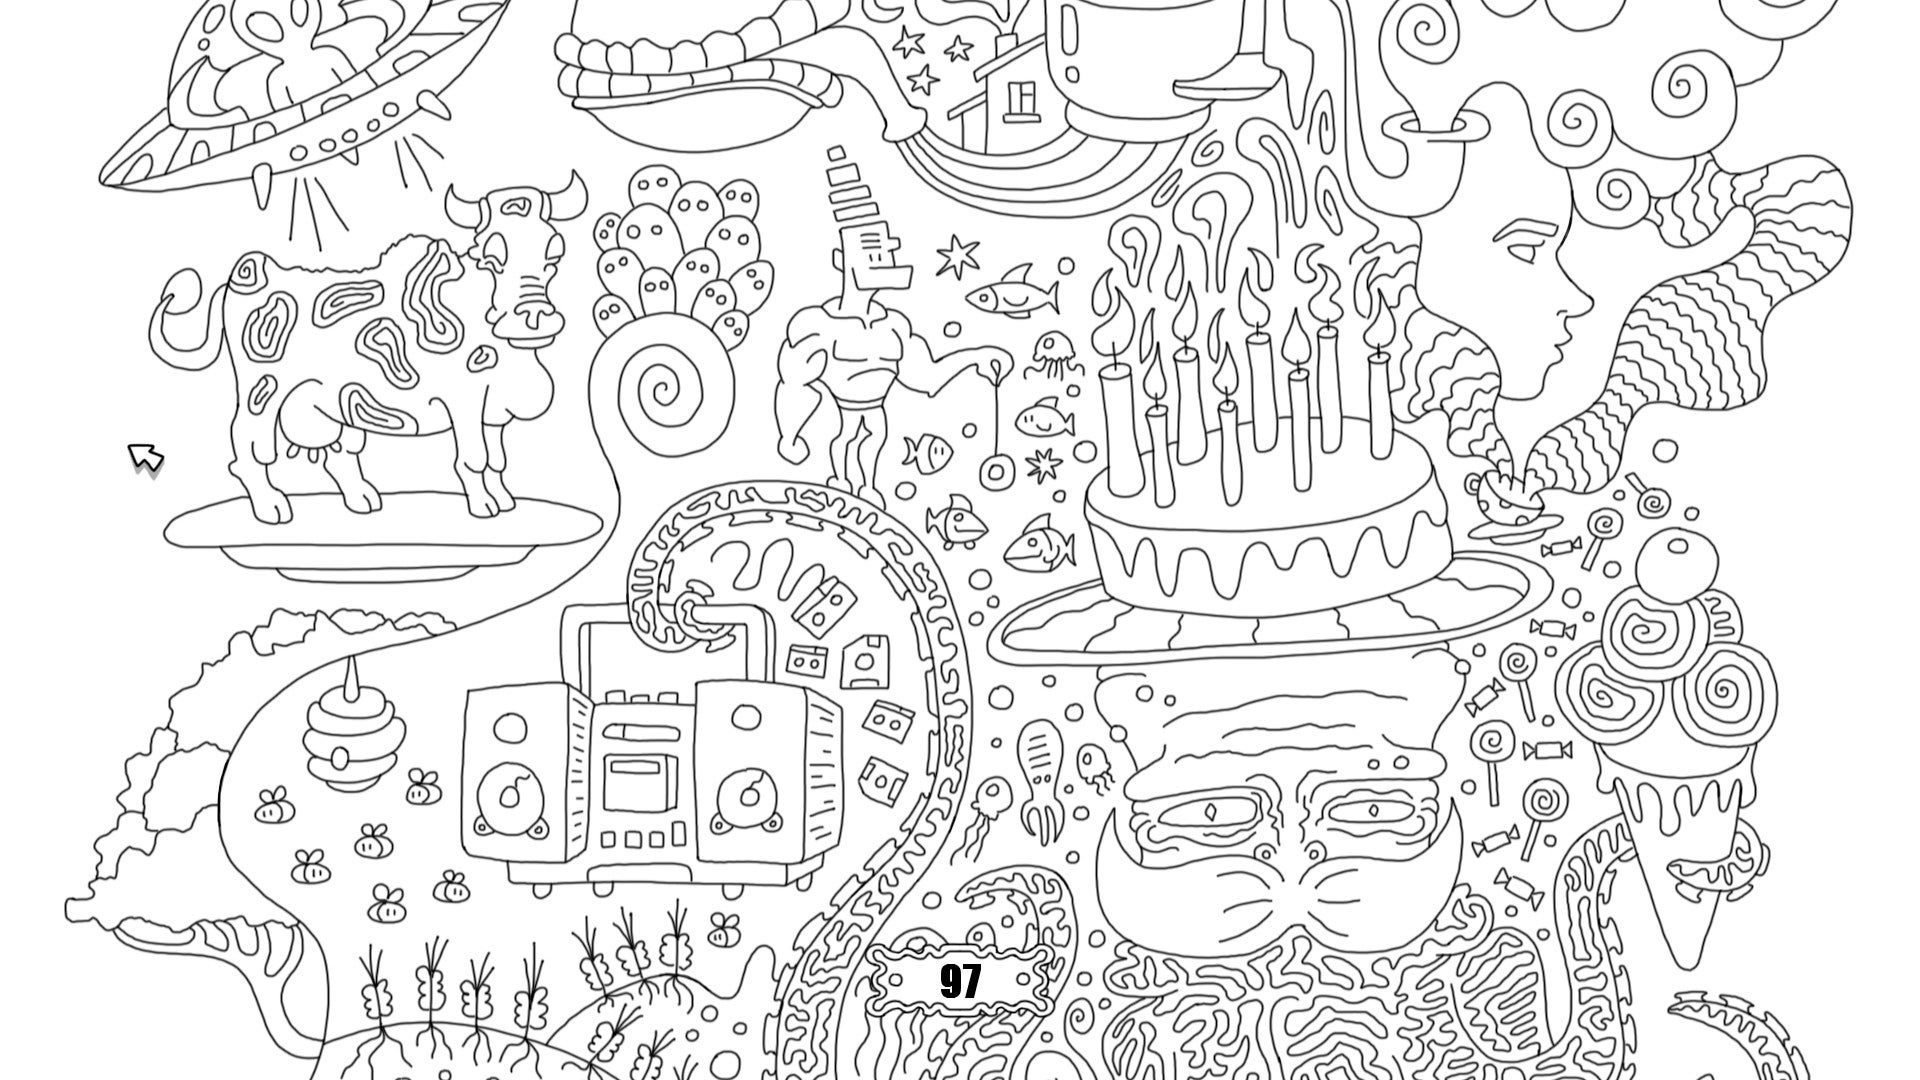 A psychedelic drawing with hidden snails in a 100 Hidden Snails screenshot.